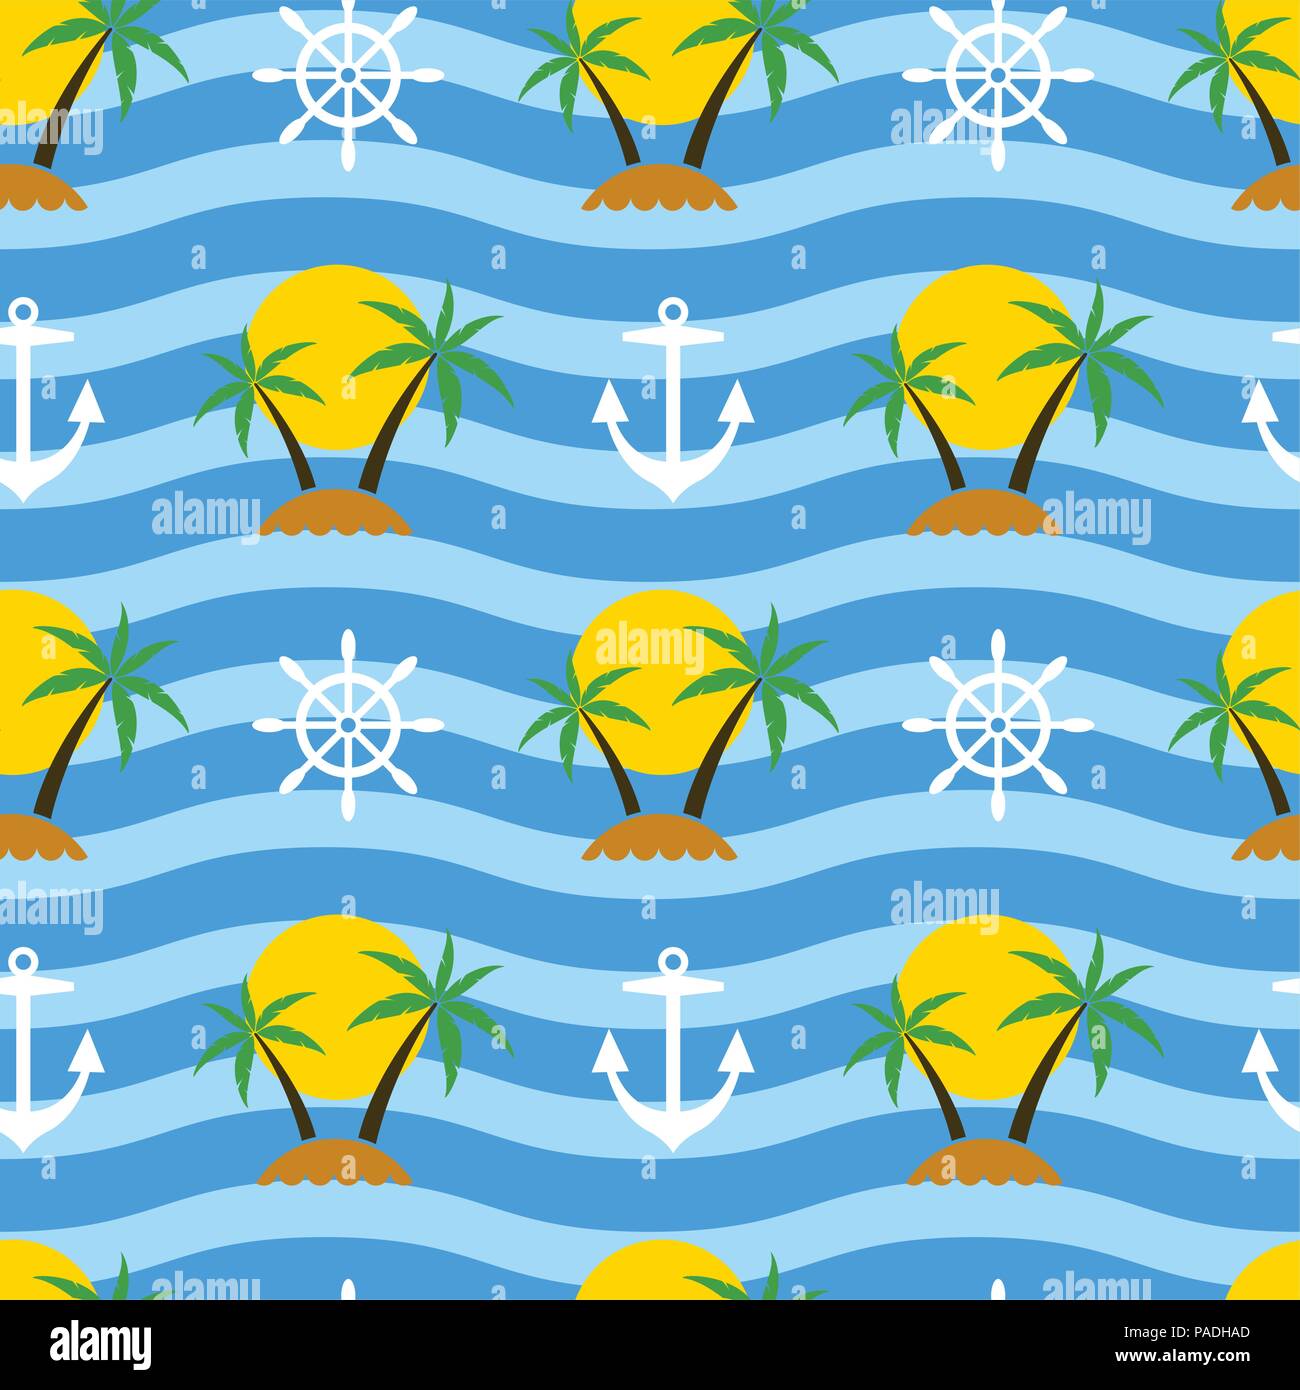 vector stylized seamless travel background with tropical palm trees, sun, sand islands, ship anchor and steering wheel on blue sea waves Stock Vector